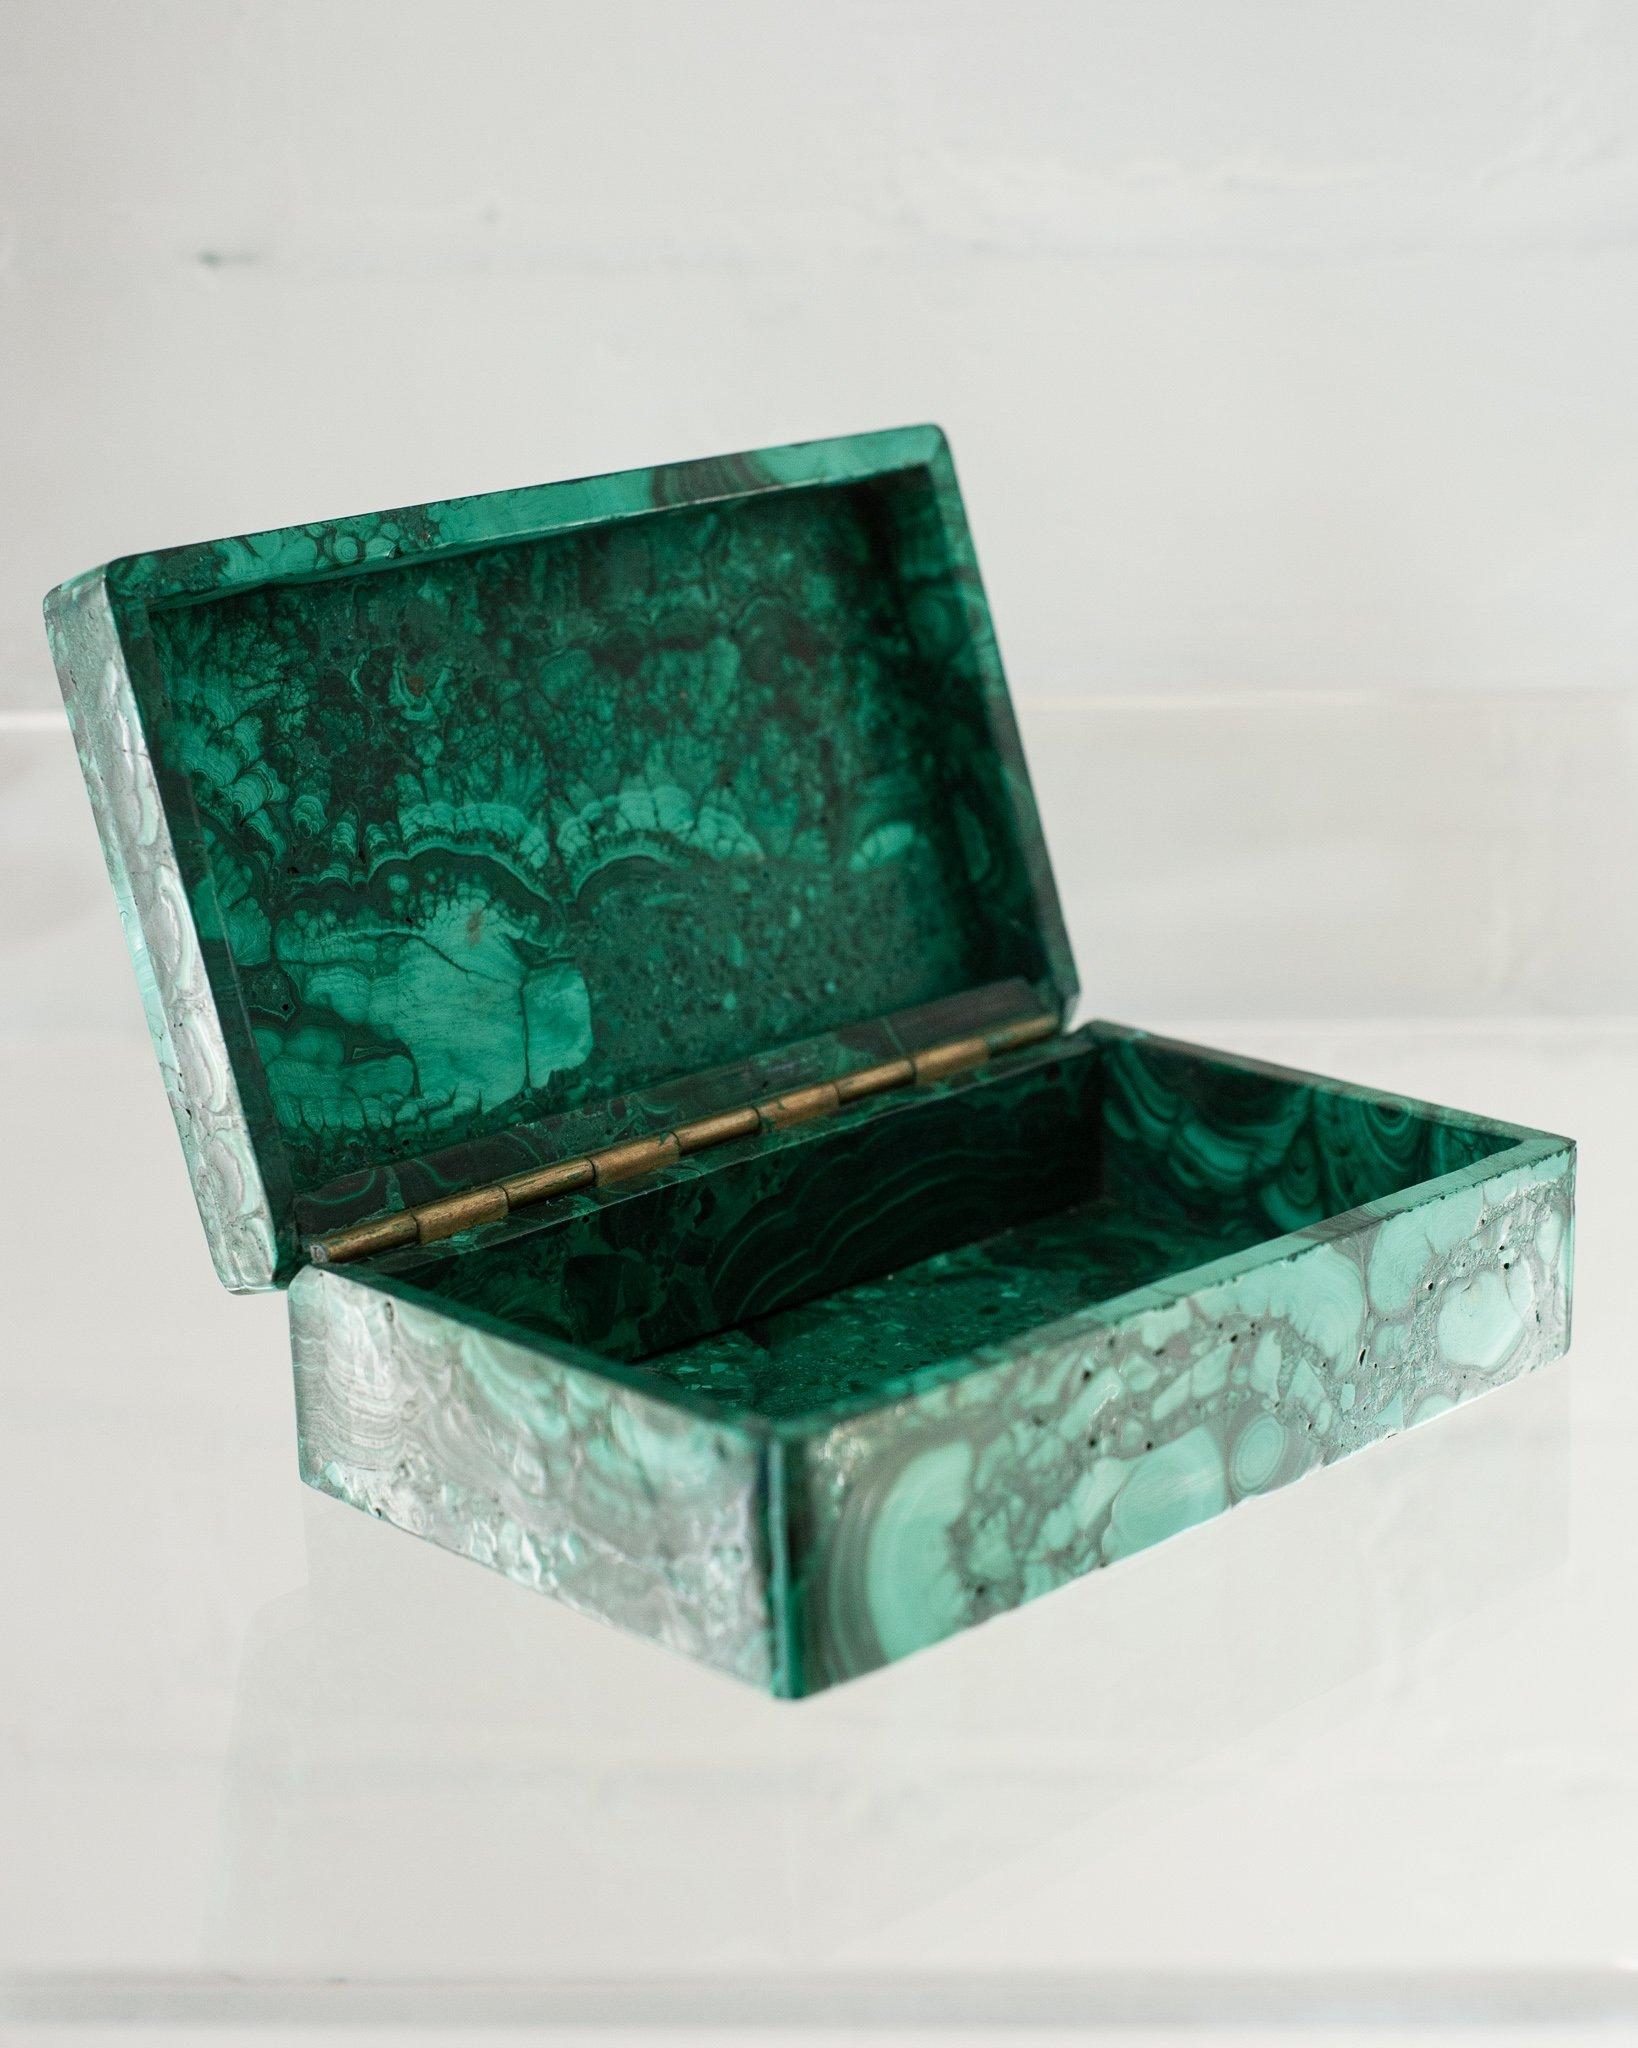 Bring St. Petersburg into your home with a Congo Malachite boxes. The Winter Palace in Russia contains one of the most outstanding displays of this gemstone in a room called The Malachite Room, designed in the 1830s.

Known as the stone of